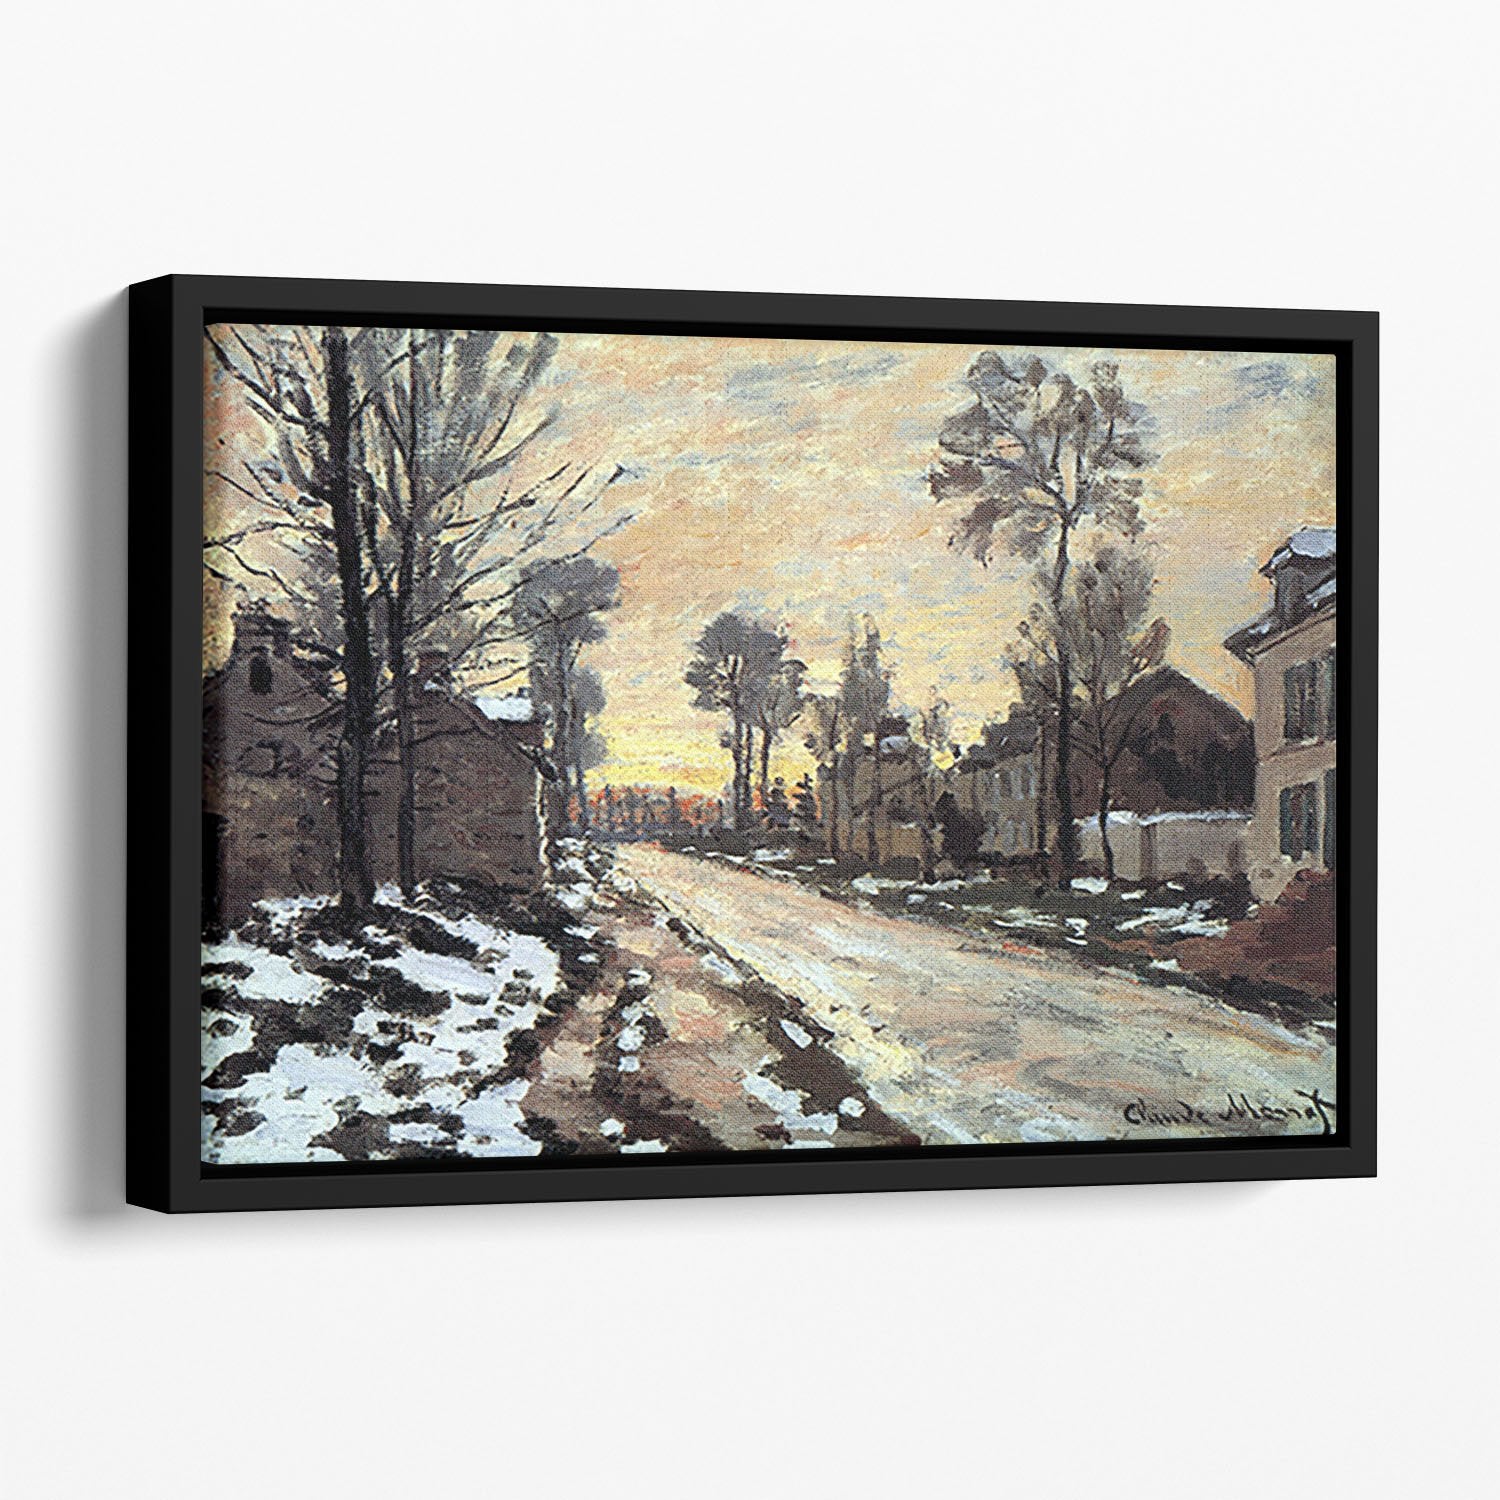 Road to Louveciennes melting snow children sunset by Monet Floating Framed Canvas